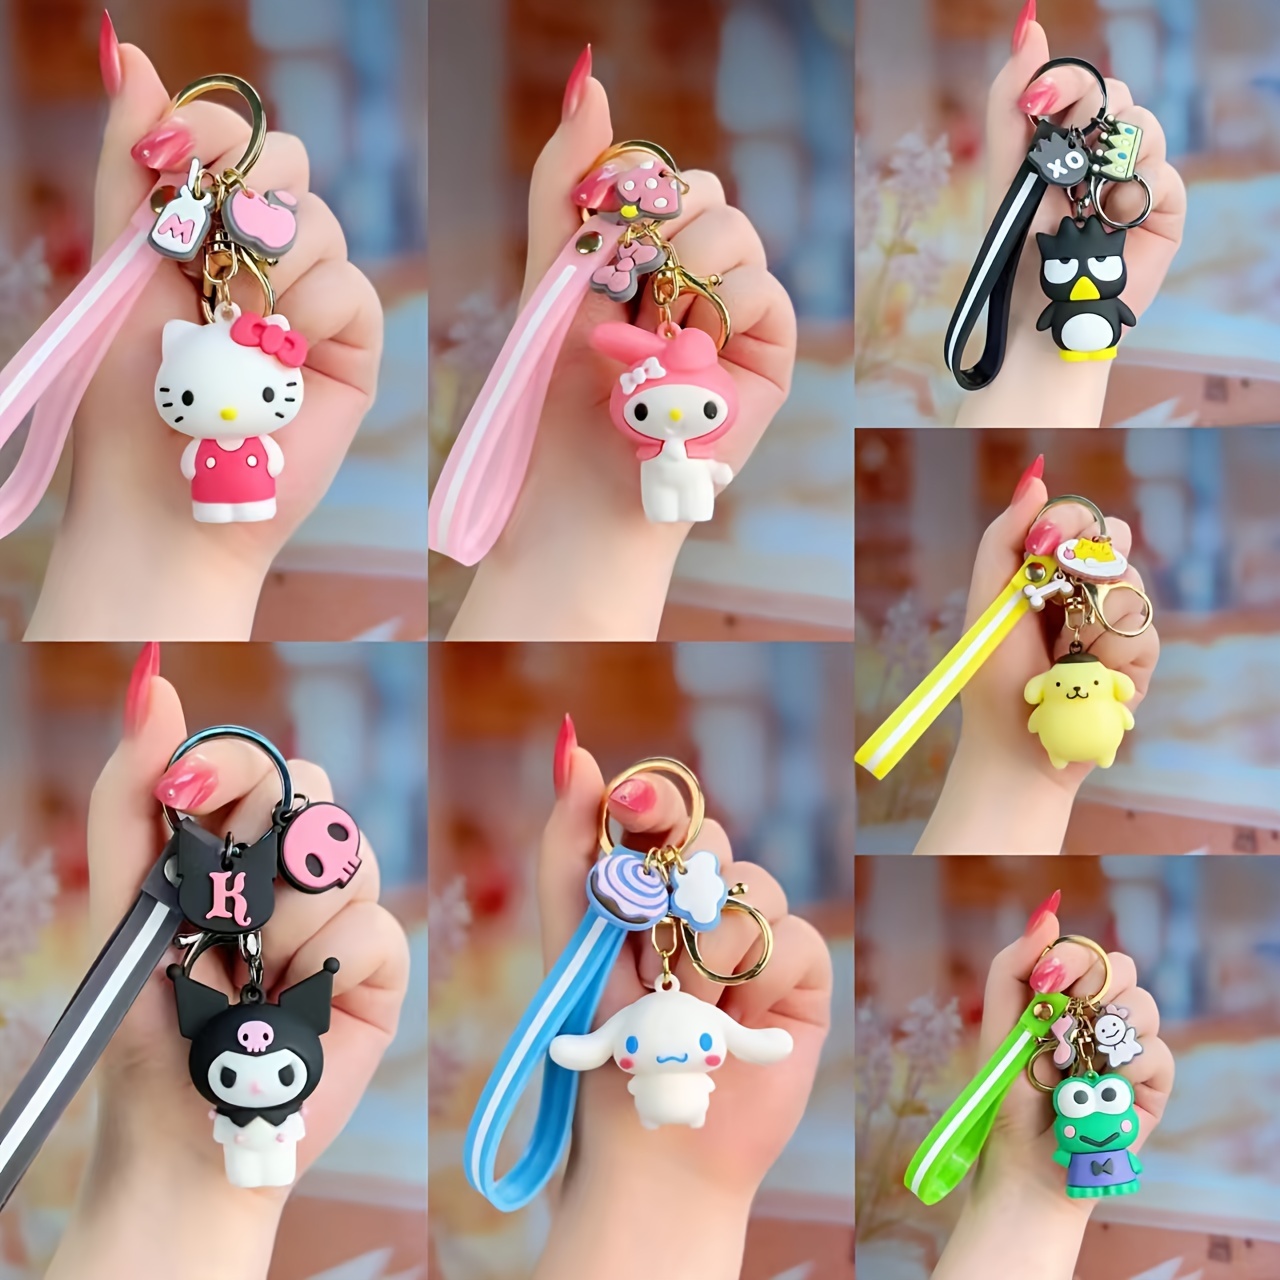 

1pc Cute Hello Kitty Series Keychain Cute Resin Anime Doll Keychain, For Car Keys Bag Ornaments Decoration Party Gift For Women Daily Use